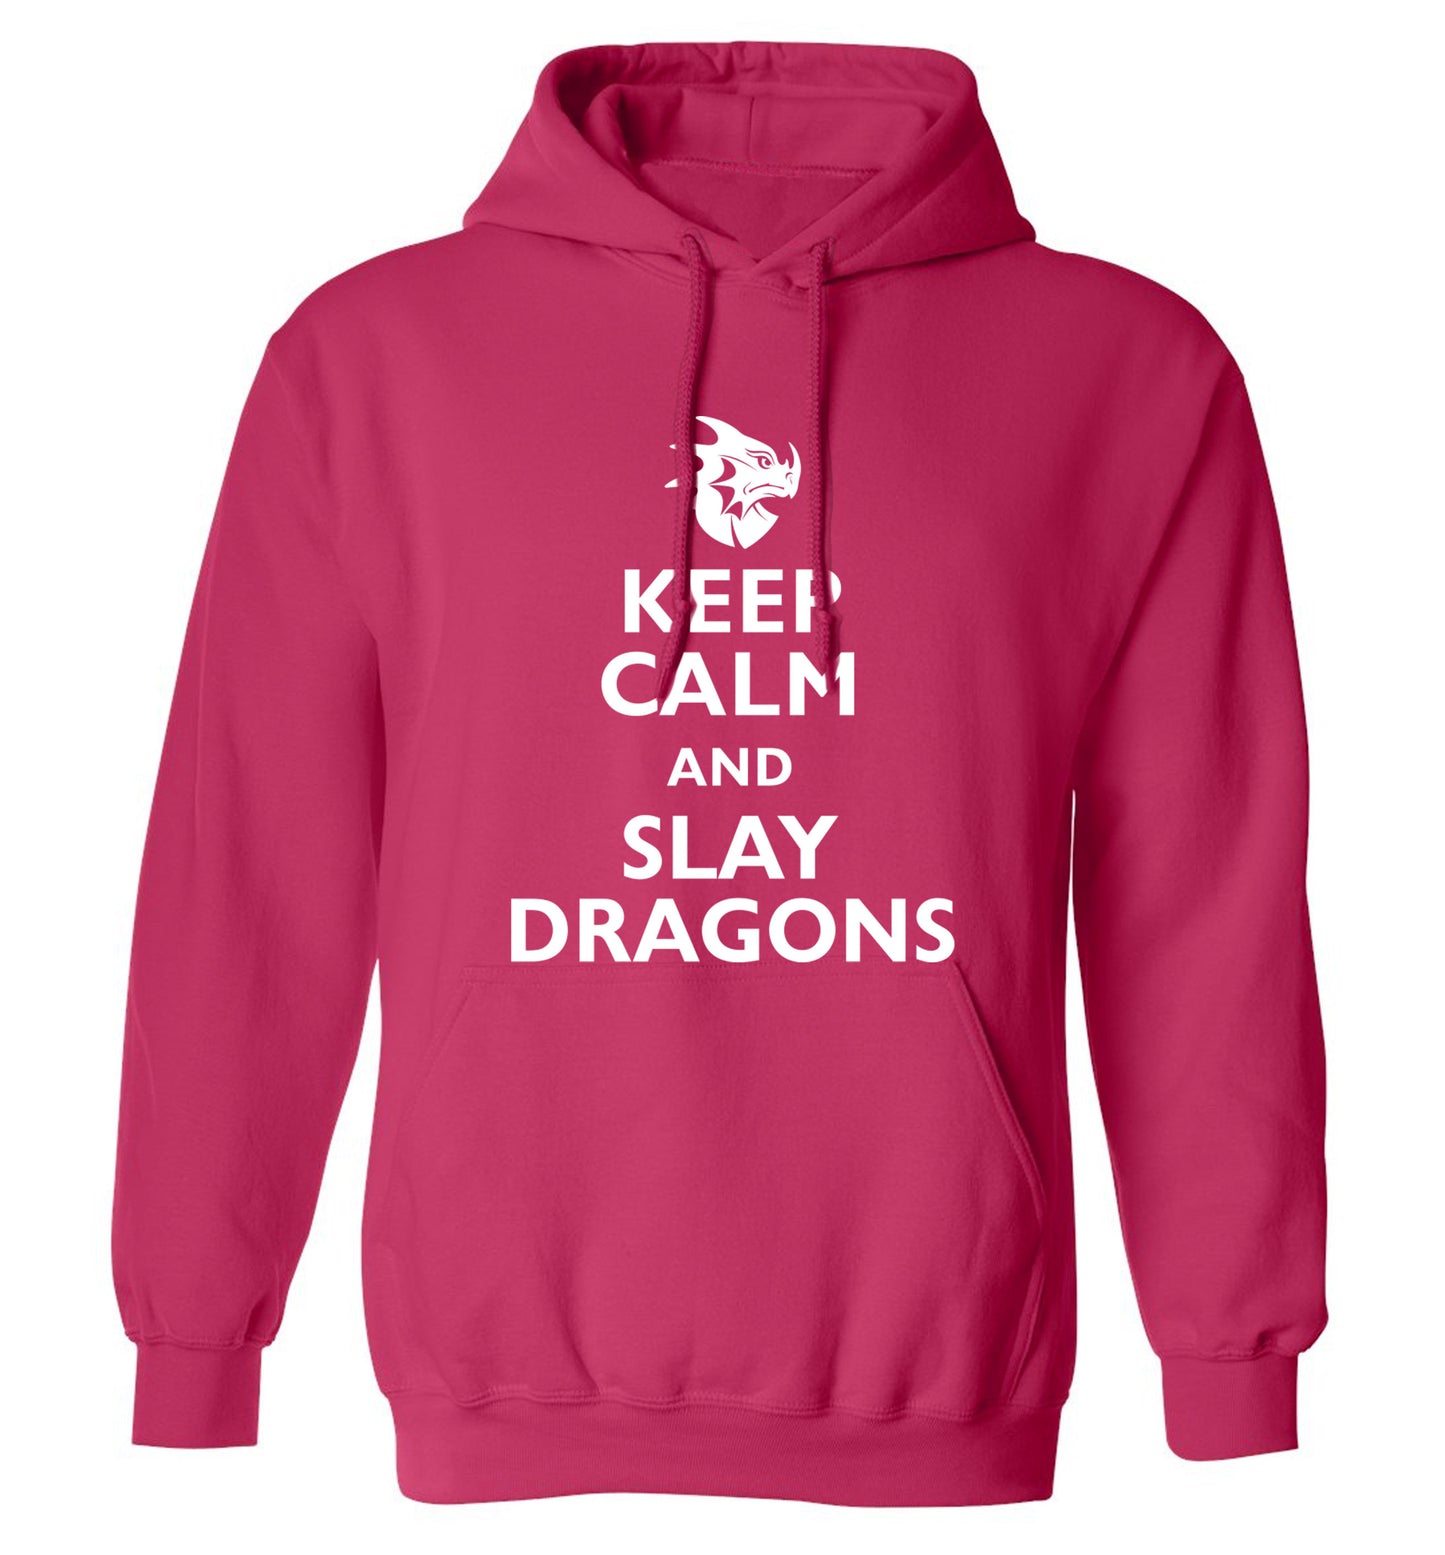 Keep calm and slay dragons adults unisex pink hoodie 2XL